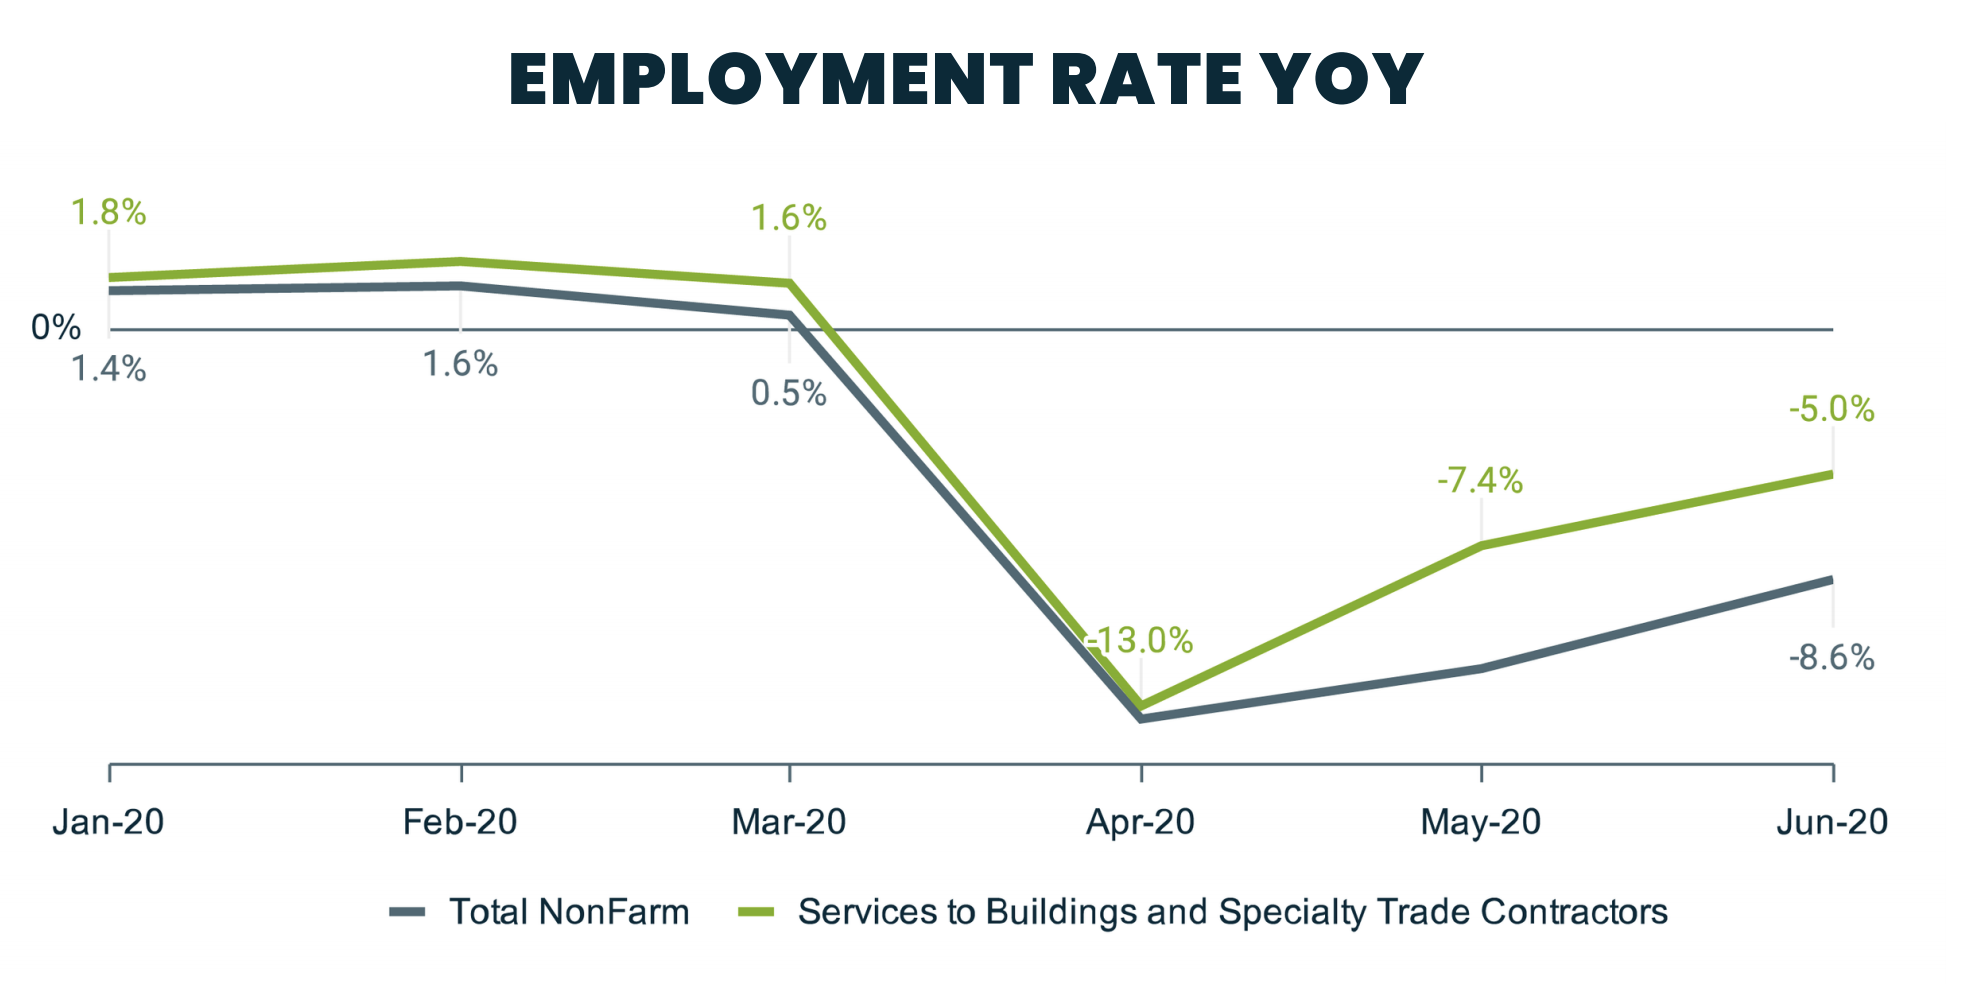 unemployment for specialty contractors